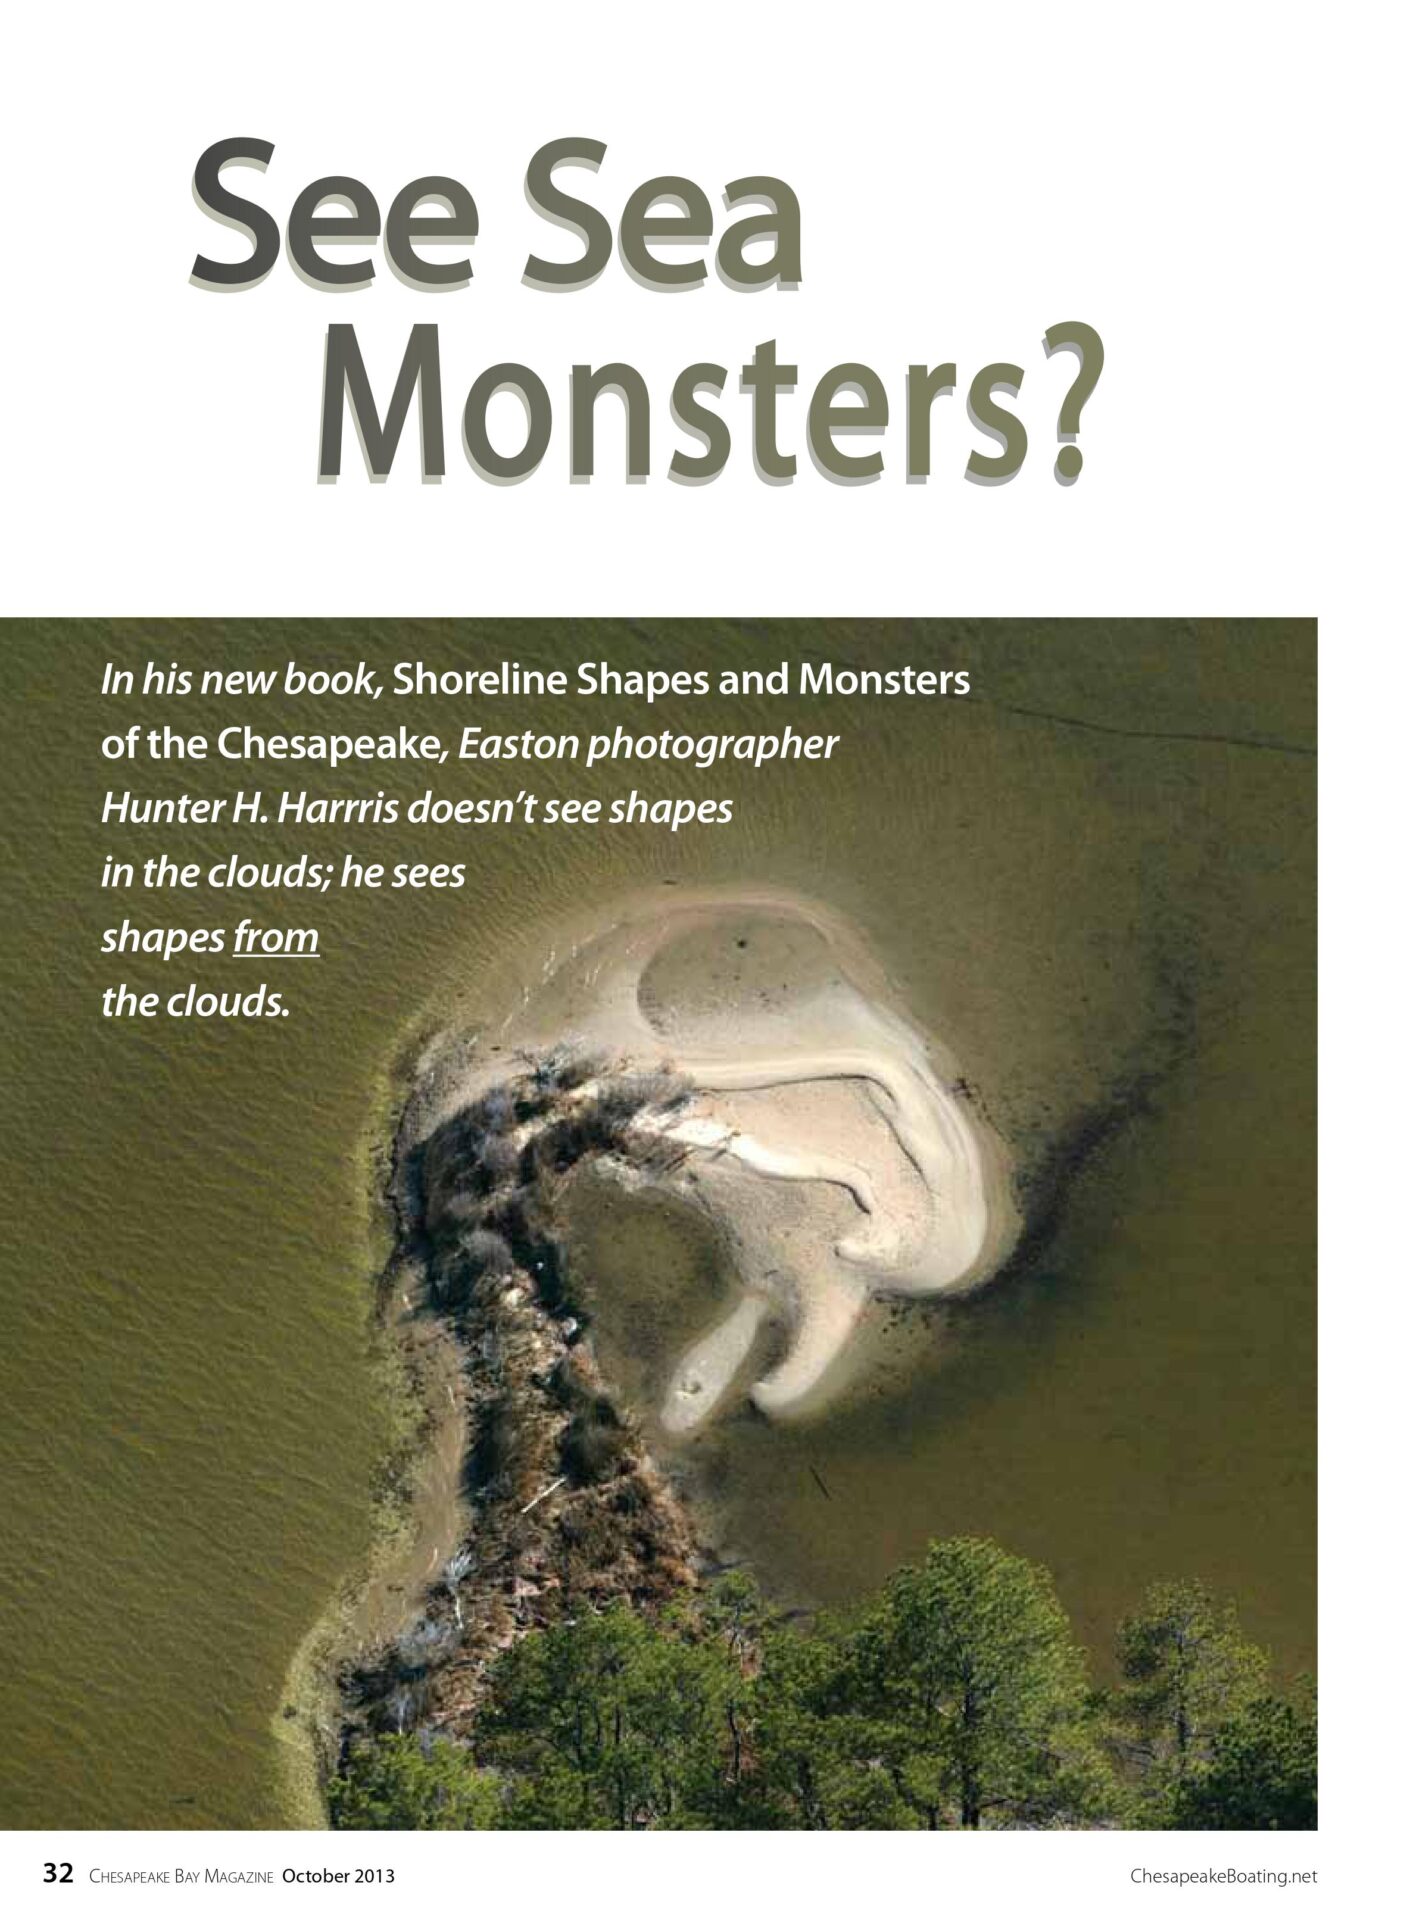 A book cover with an image of a sea monster.